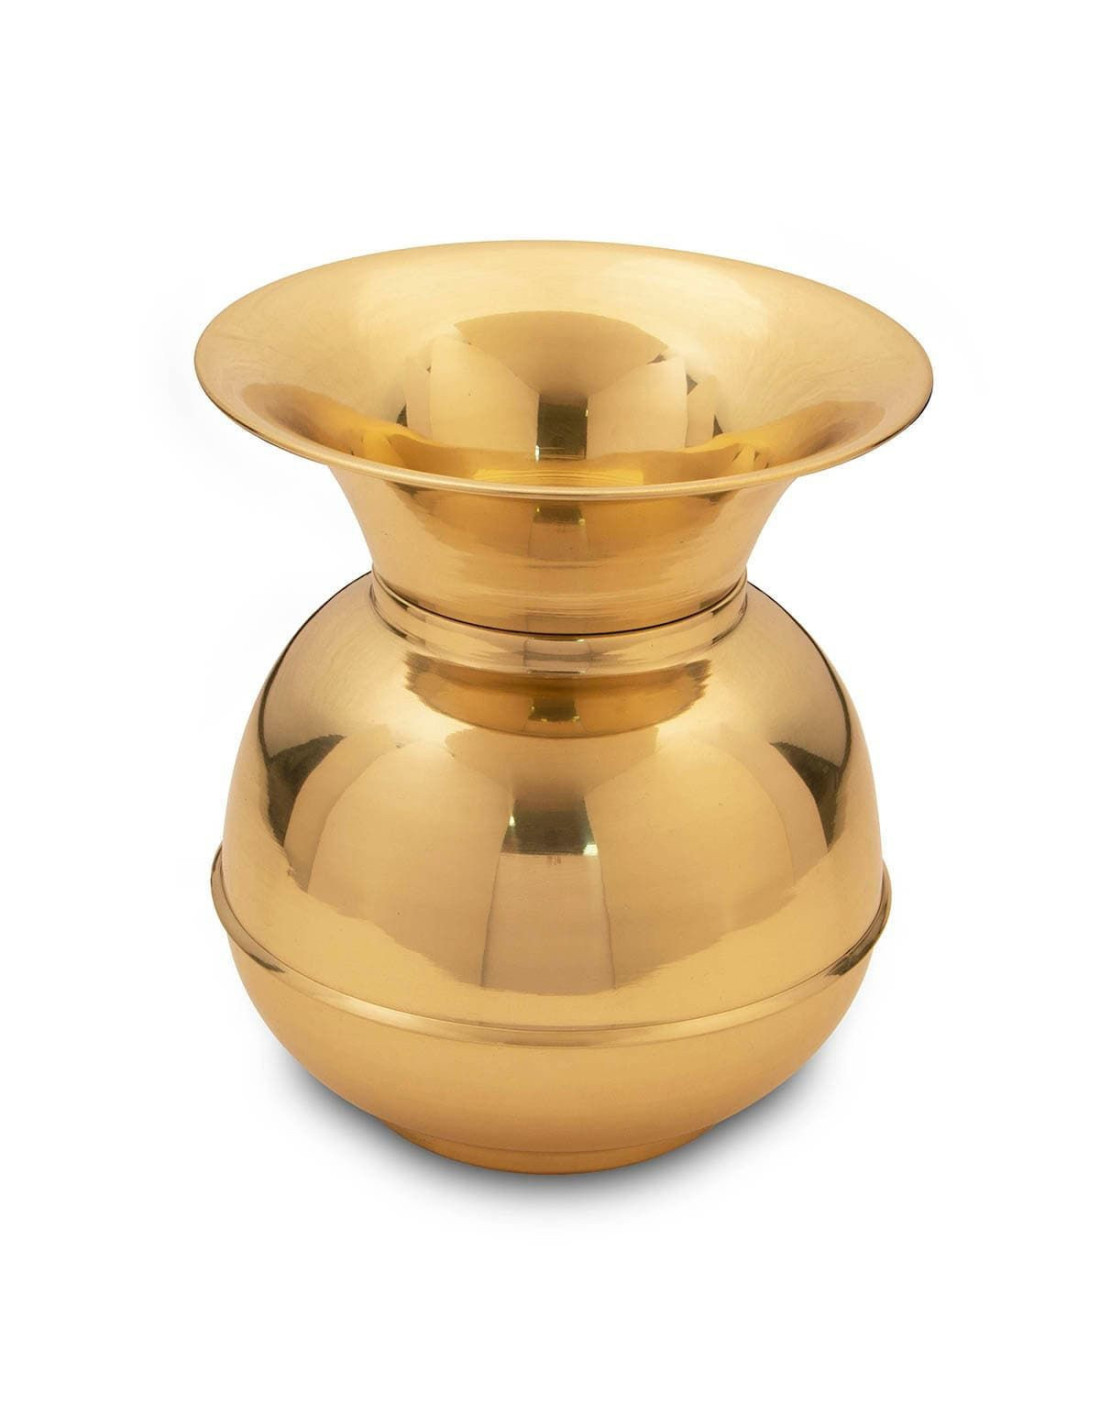 Old West Brass Spittoon Replica ⚔️ Medieval Shop